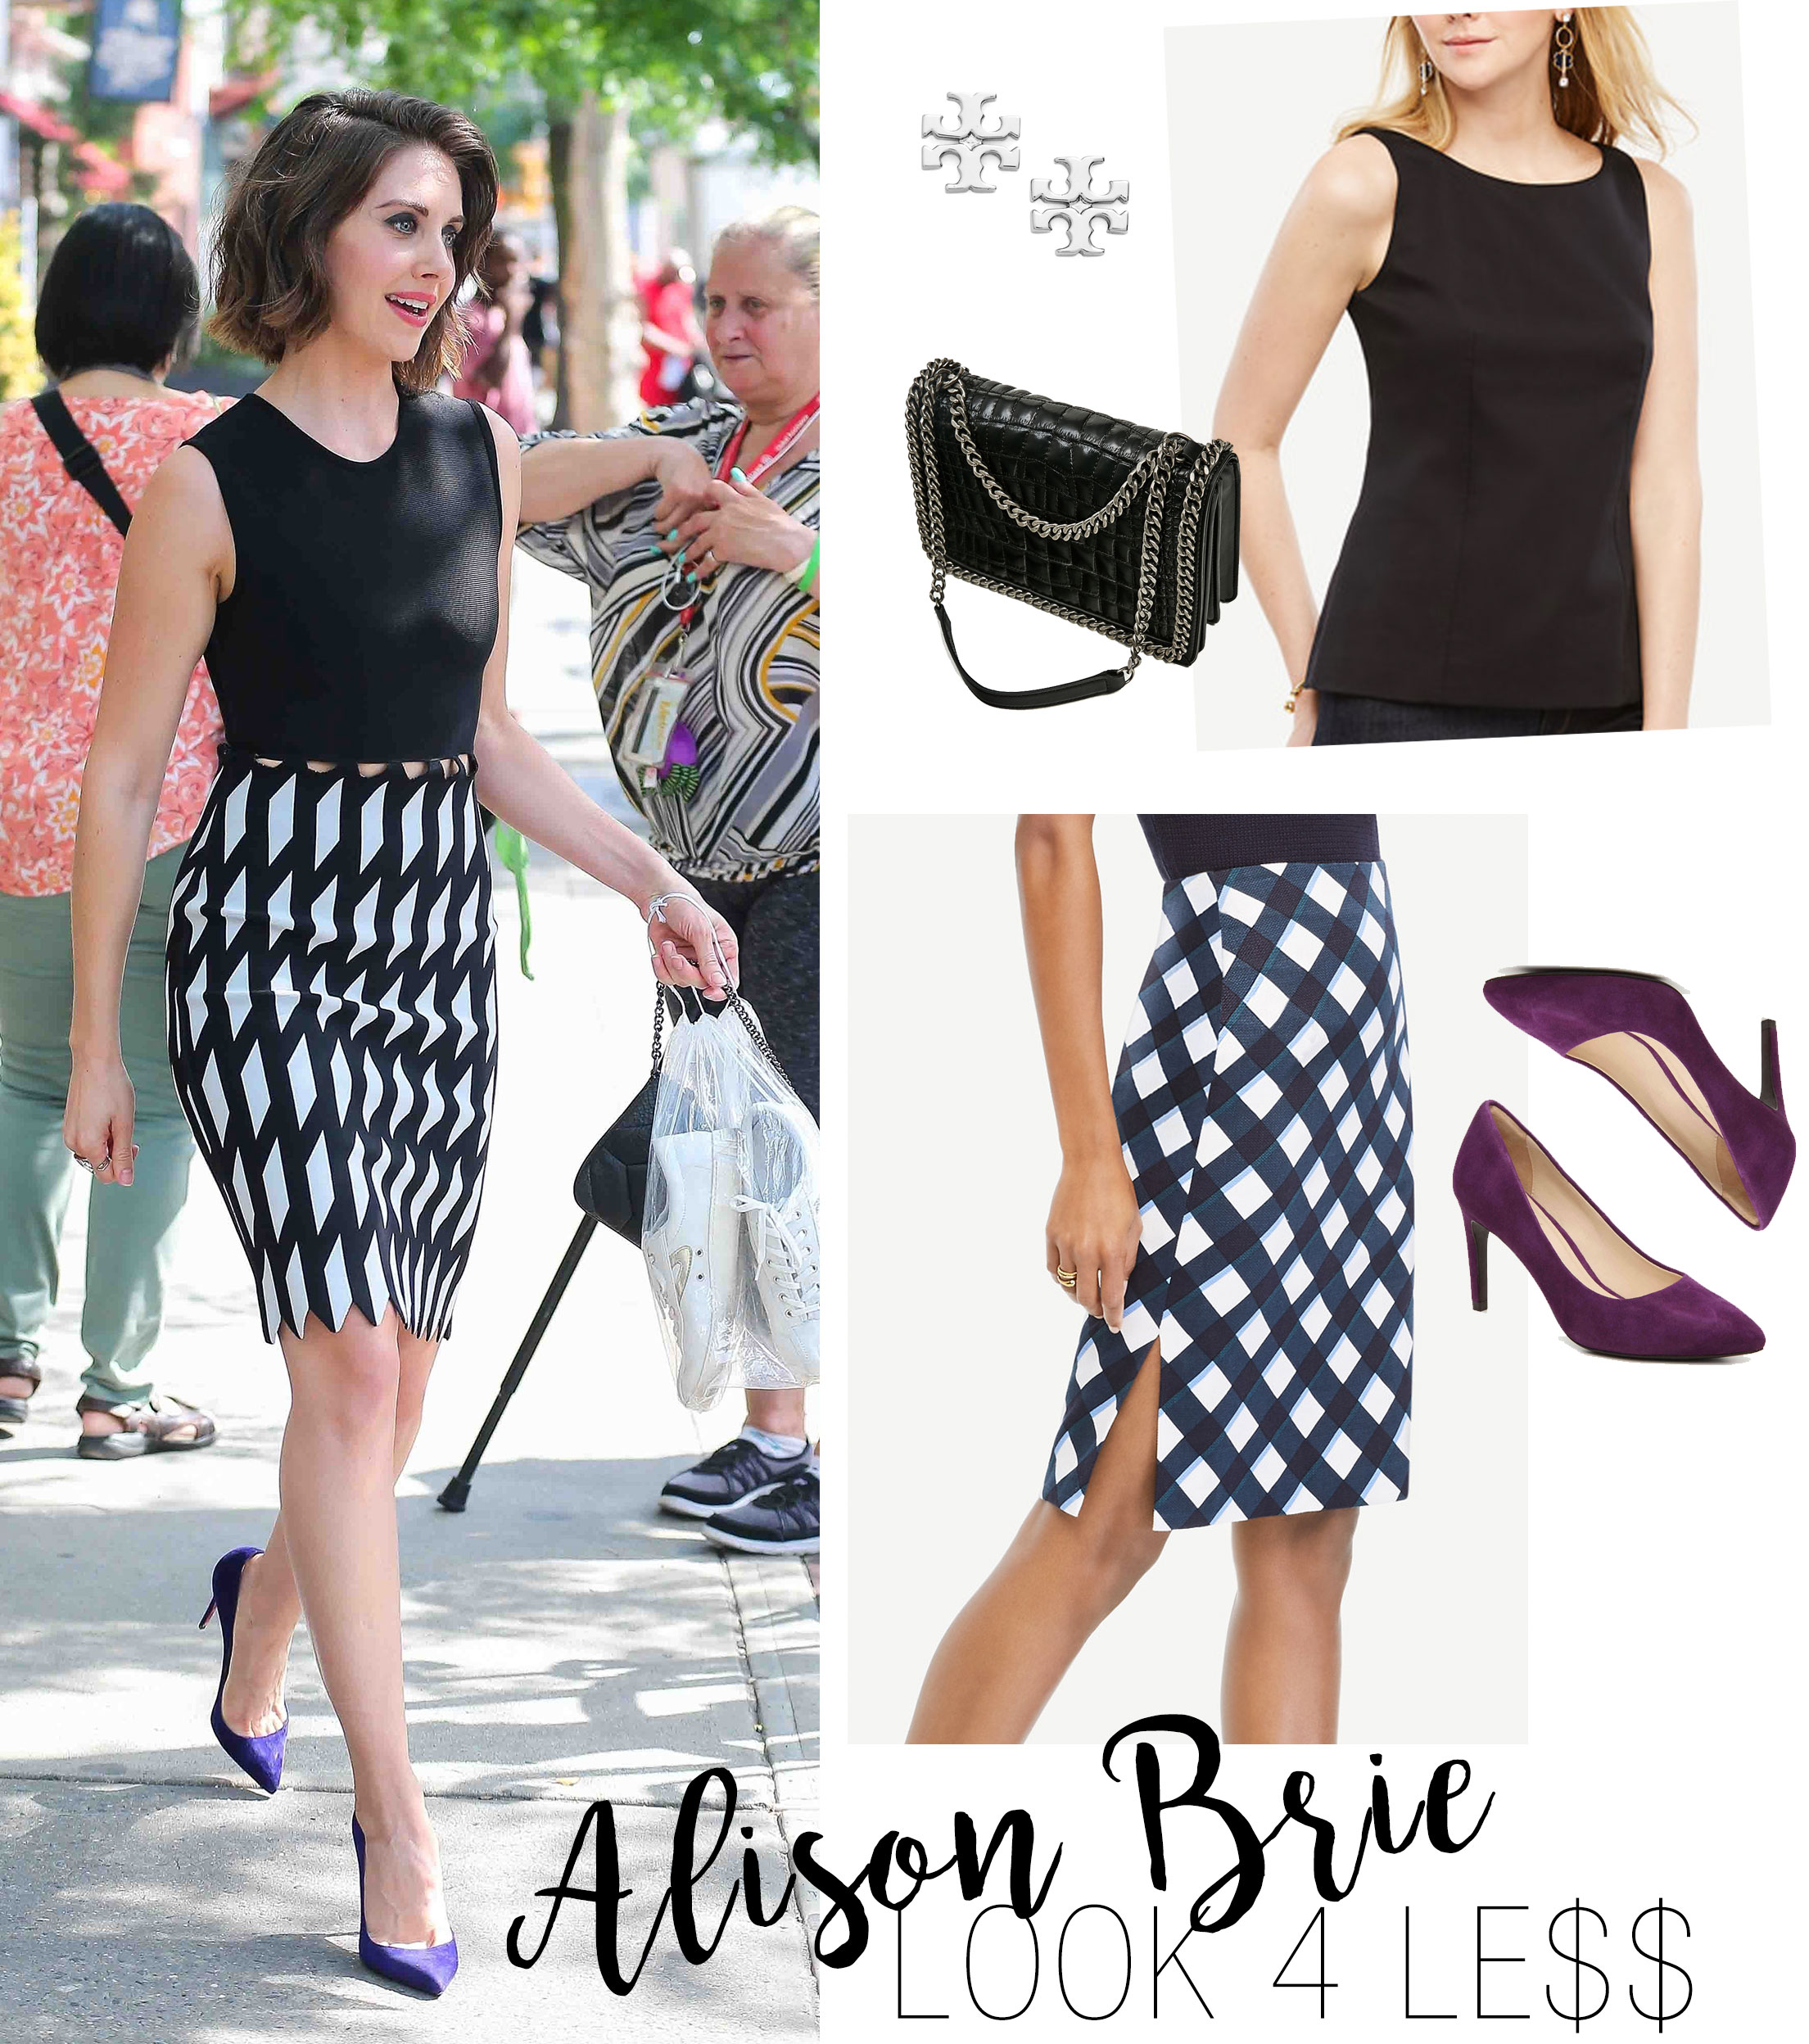 Alison Brie from Mad Men looks chic for summer in a black and white print pencil skirt.